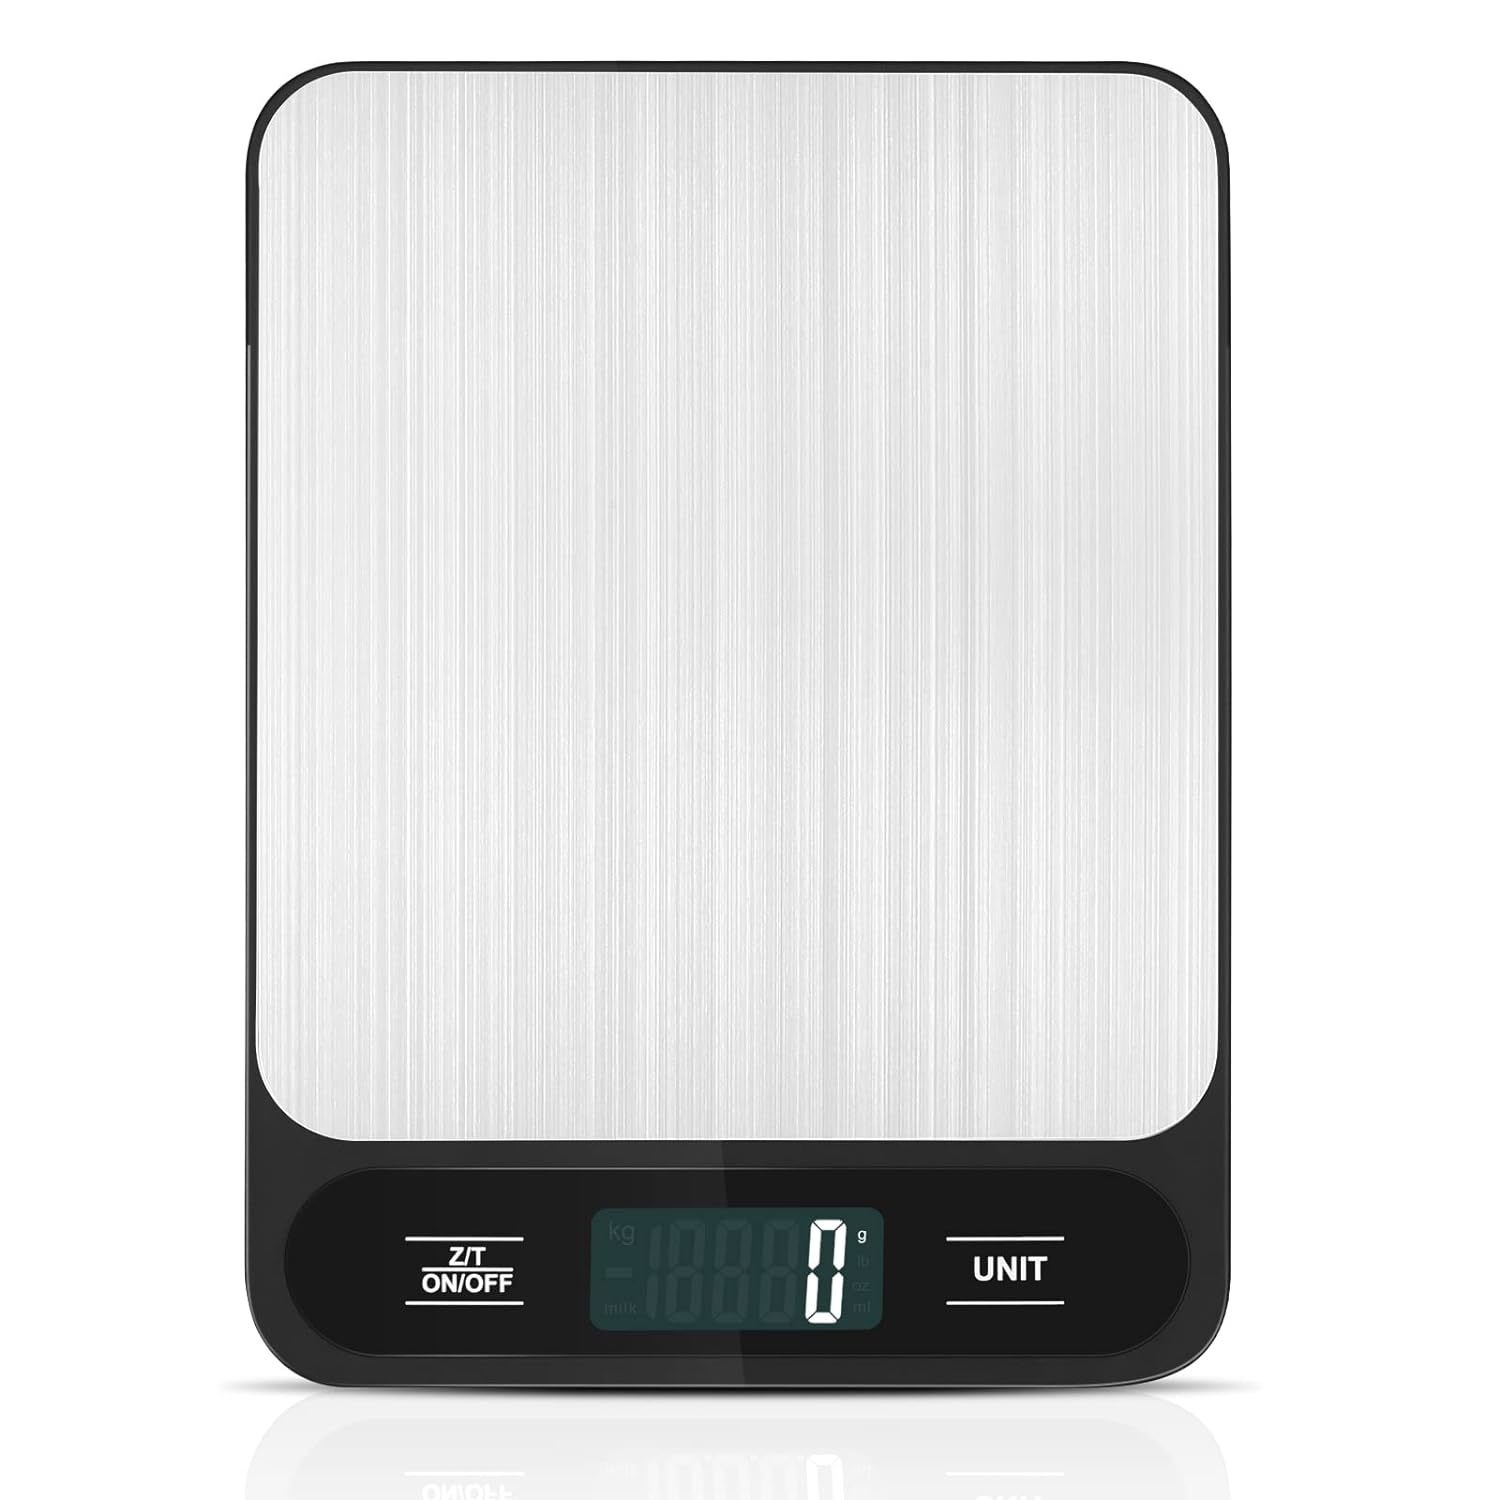 Taylor Mechanical Kitchen Weighing Food Scale Weighs up to 11lbs, Measures  in Grams and Ounces, Black and Silver